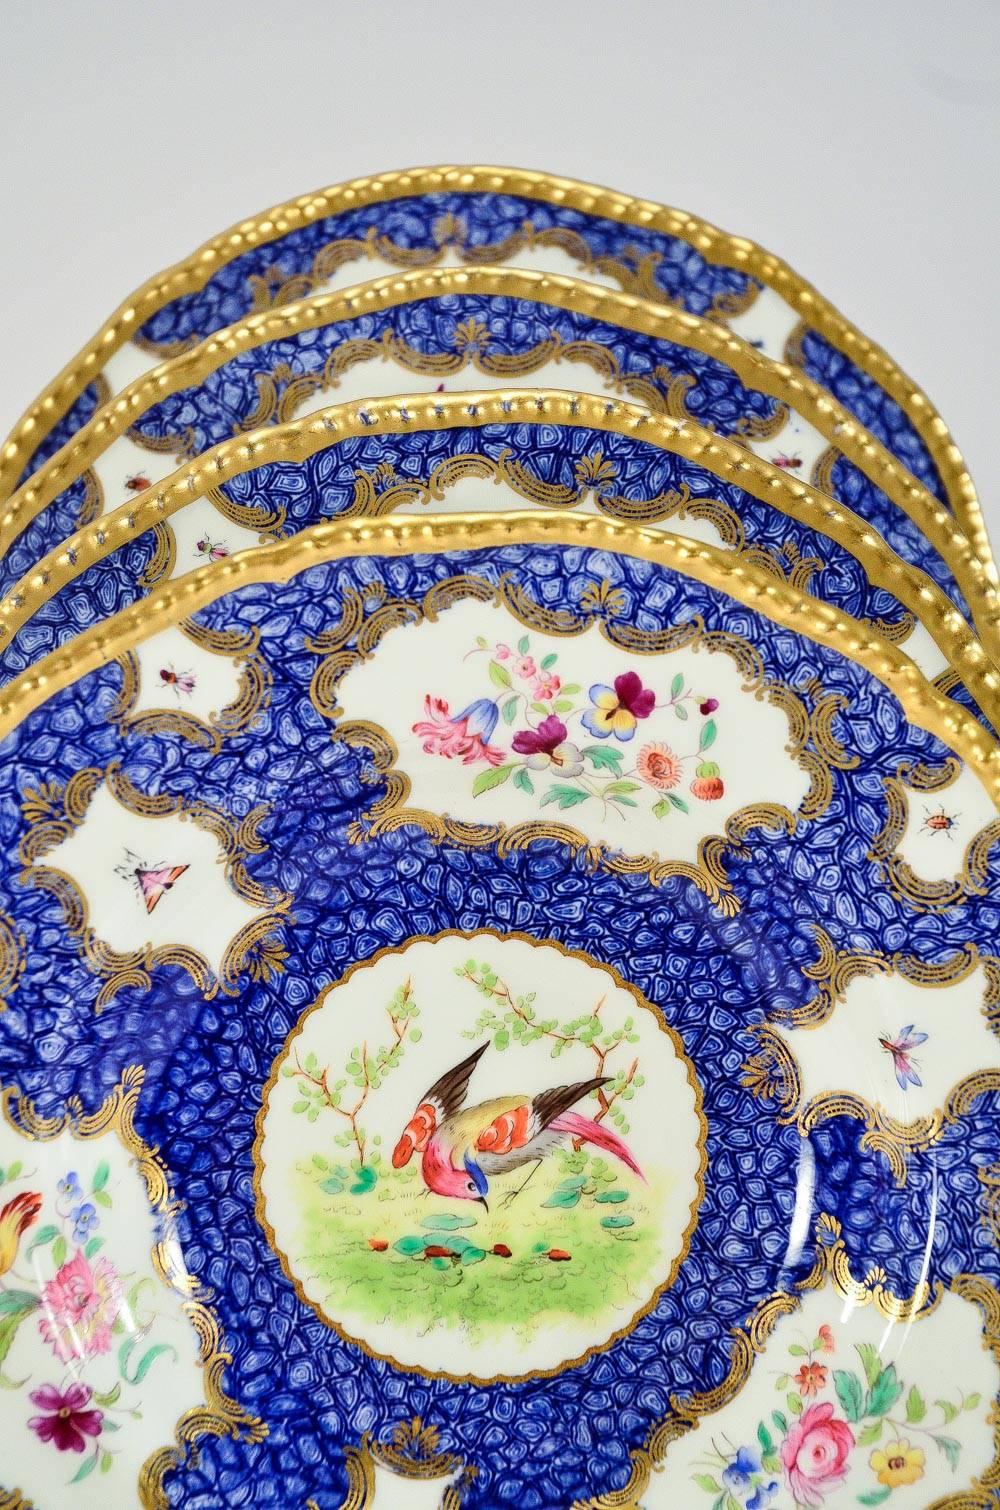 Rimmed soup bowls are in demand and this set of 12 Coalport hand painted bowls are perfect for soup, pasta and desserts as their large size makes them very versatile. Framed by a gold gadroon border, each bowl features a different exotic bird in the